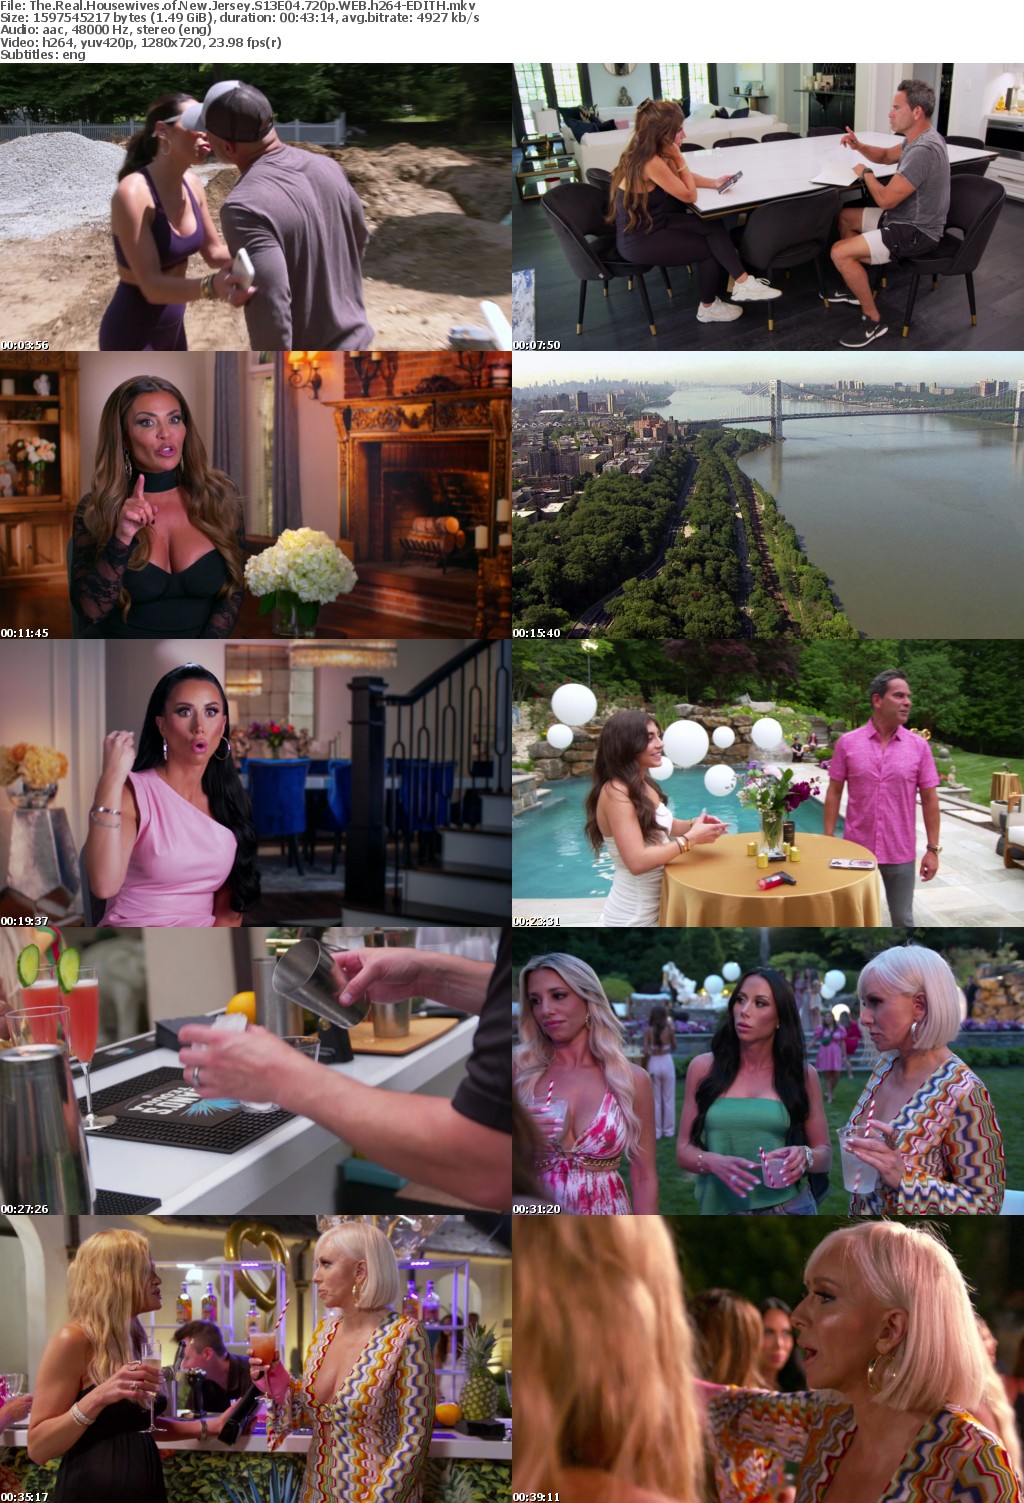 The Real Housewives of New Jersey S13E04 720p WEB h264-EDITH